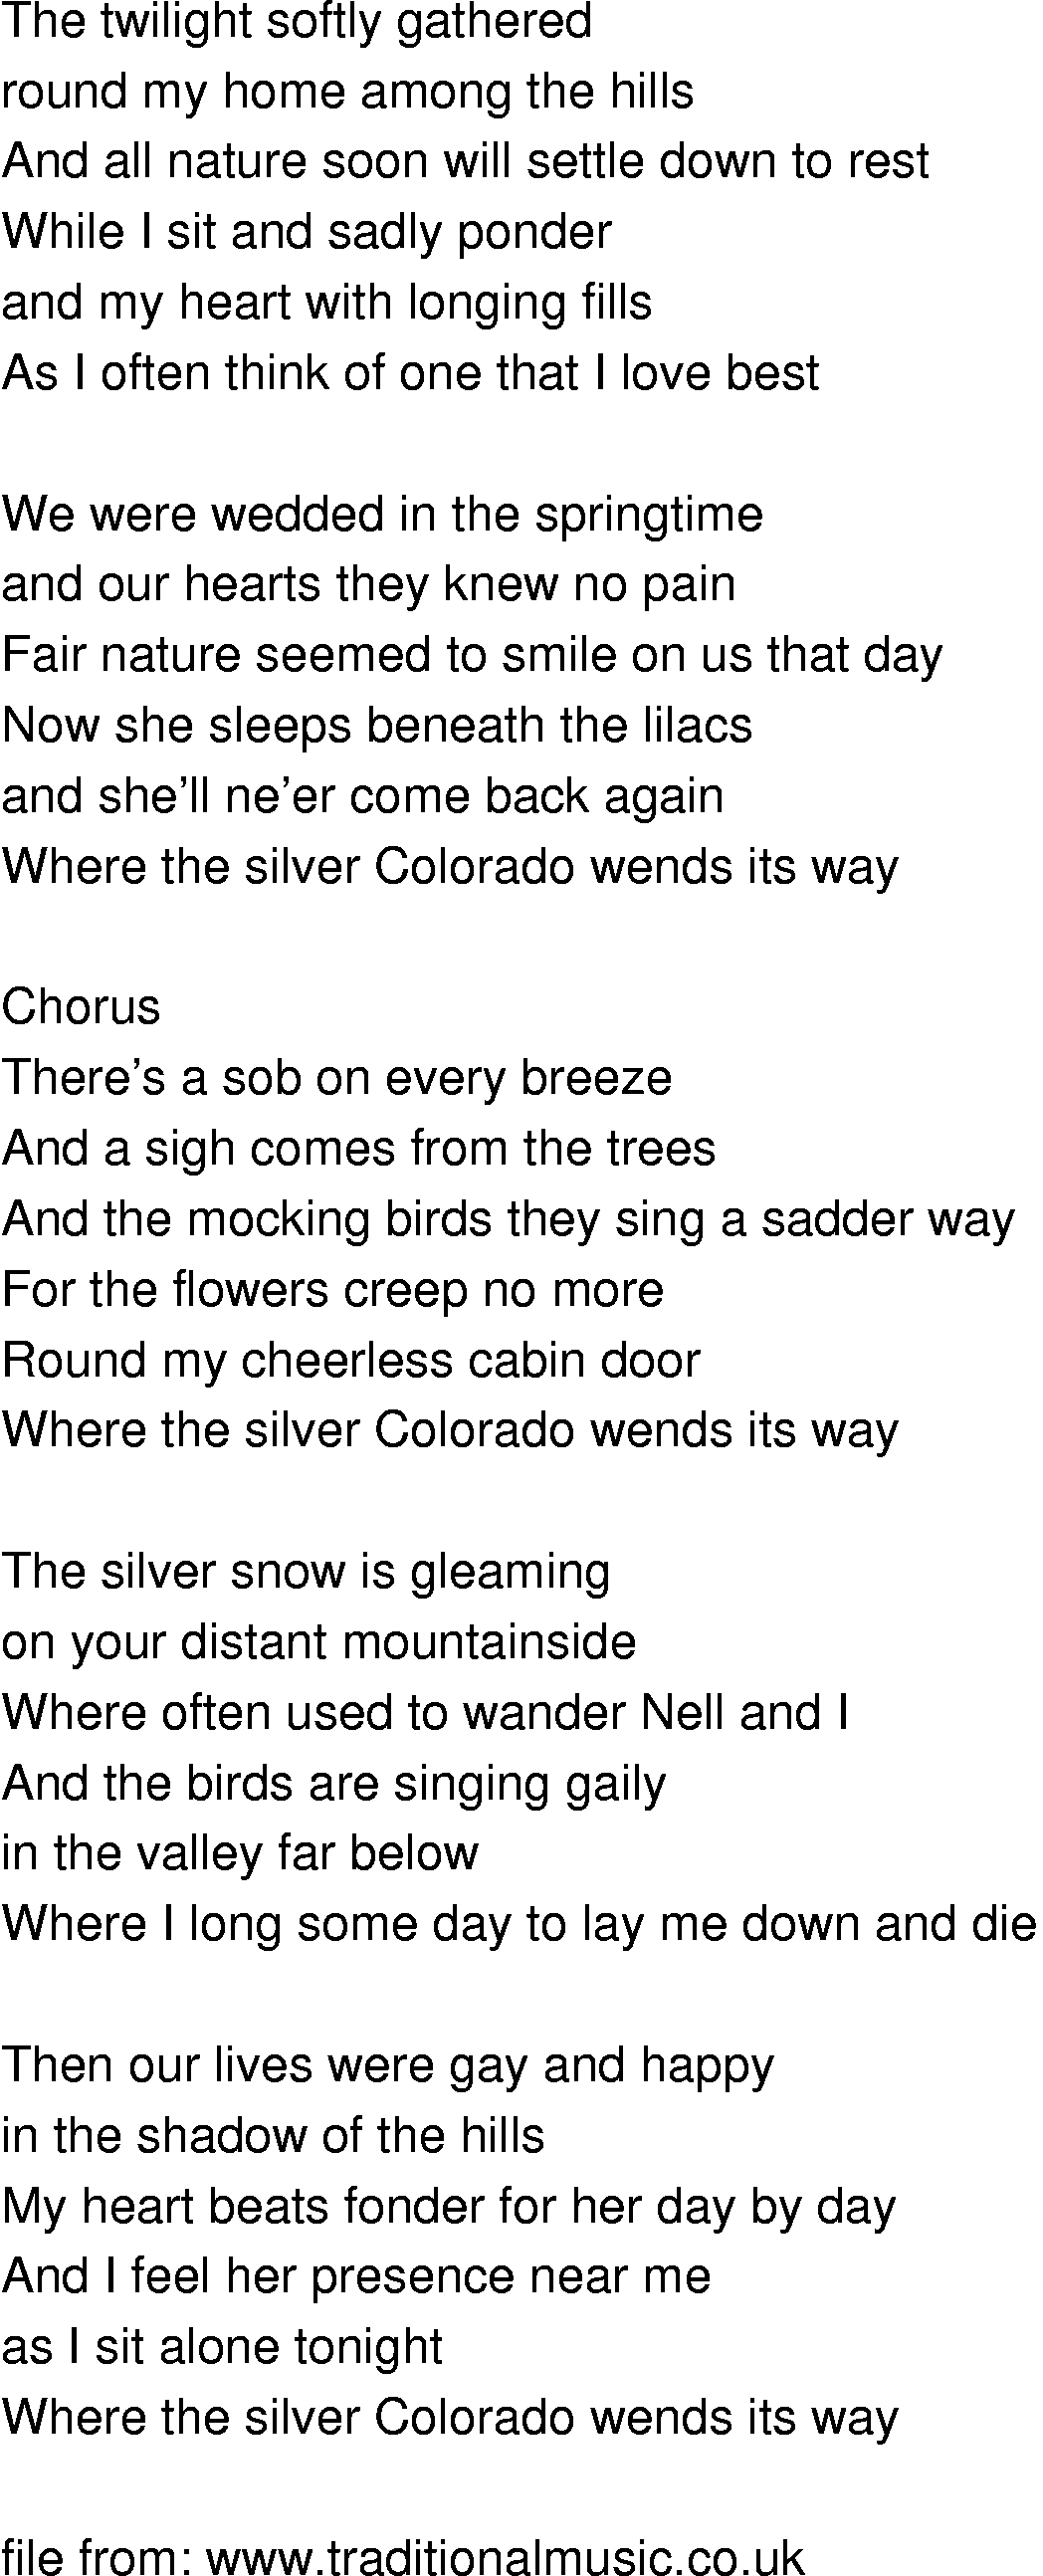 Old-Time (oldtimey) Song Lyrics - where the silvery colorado wends its way